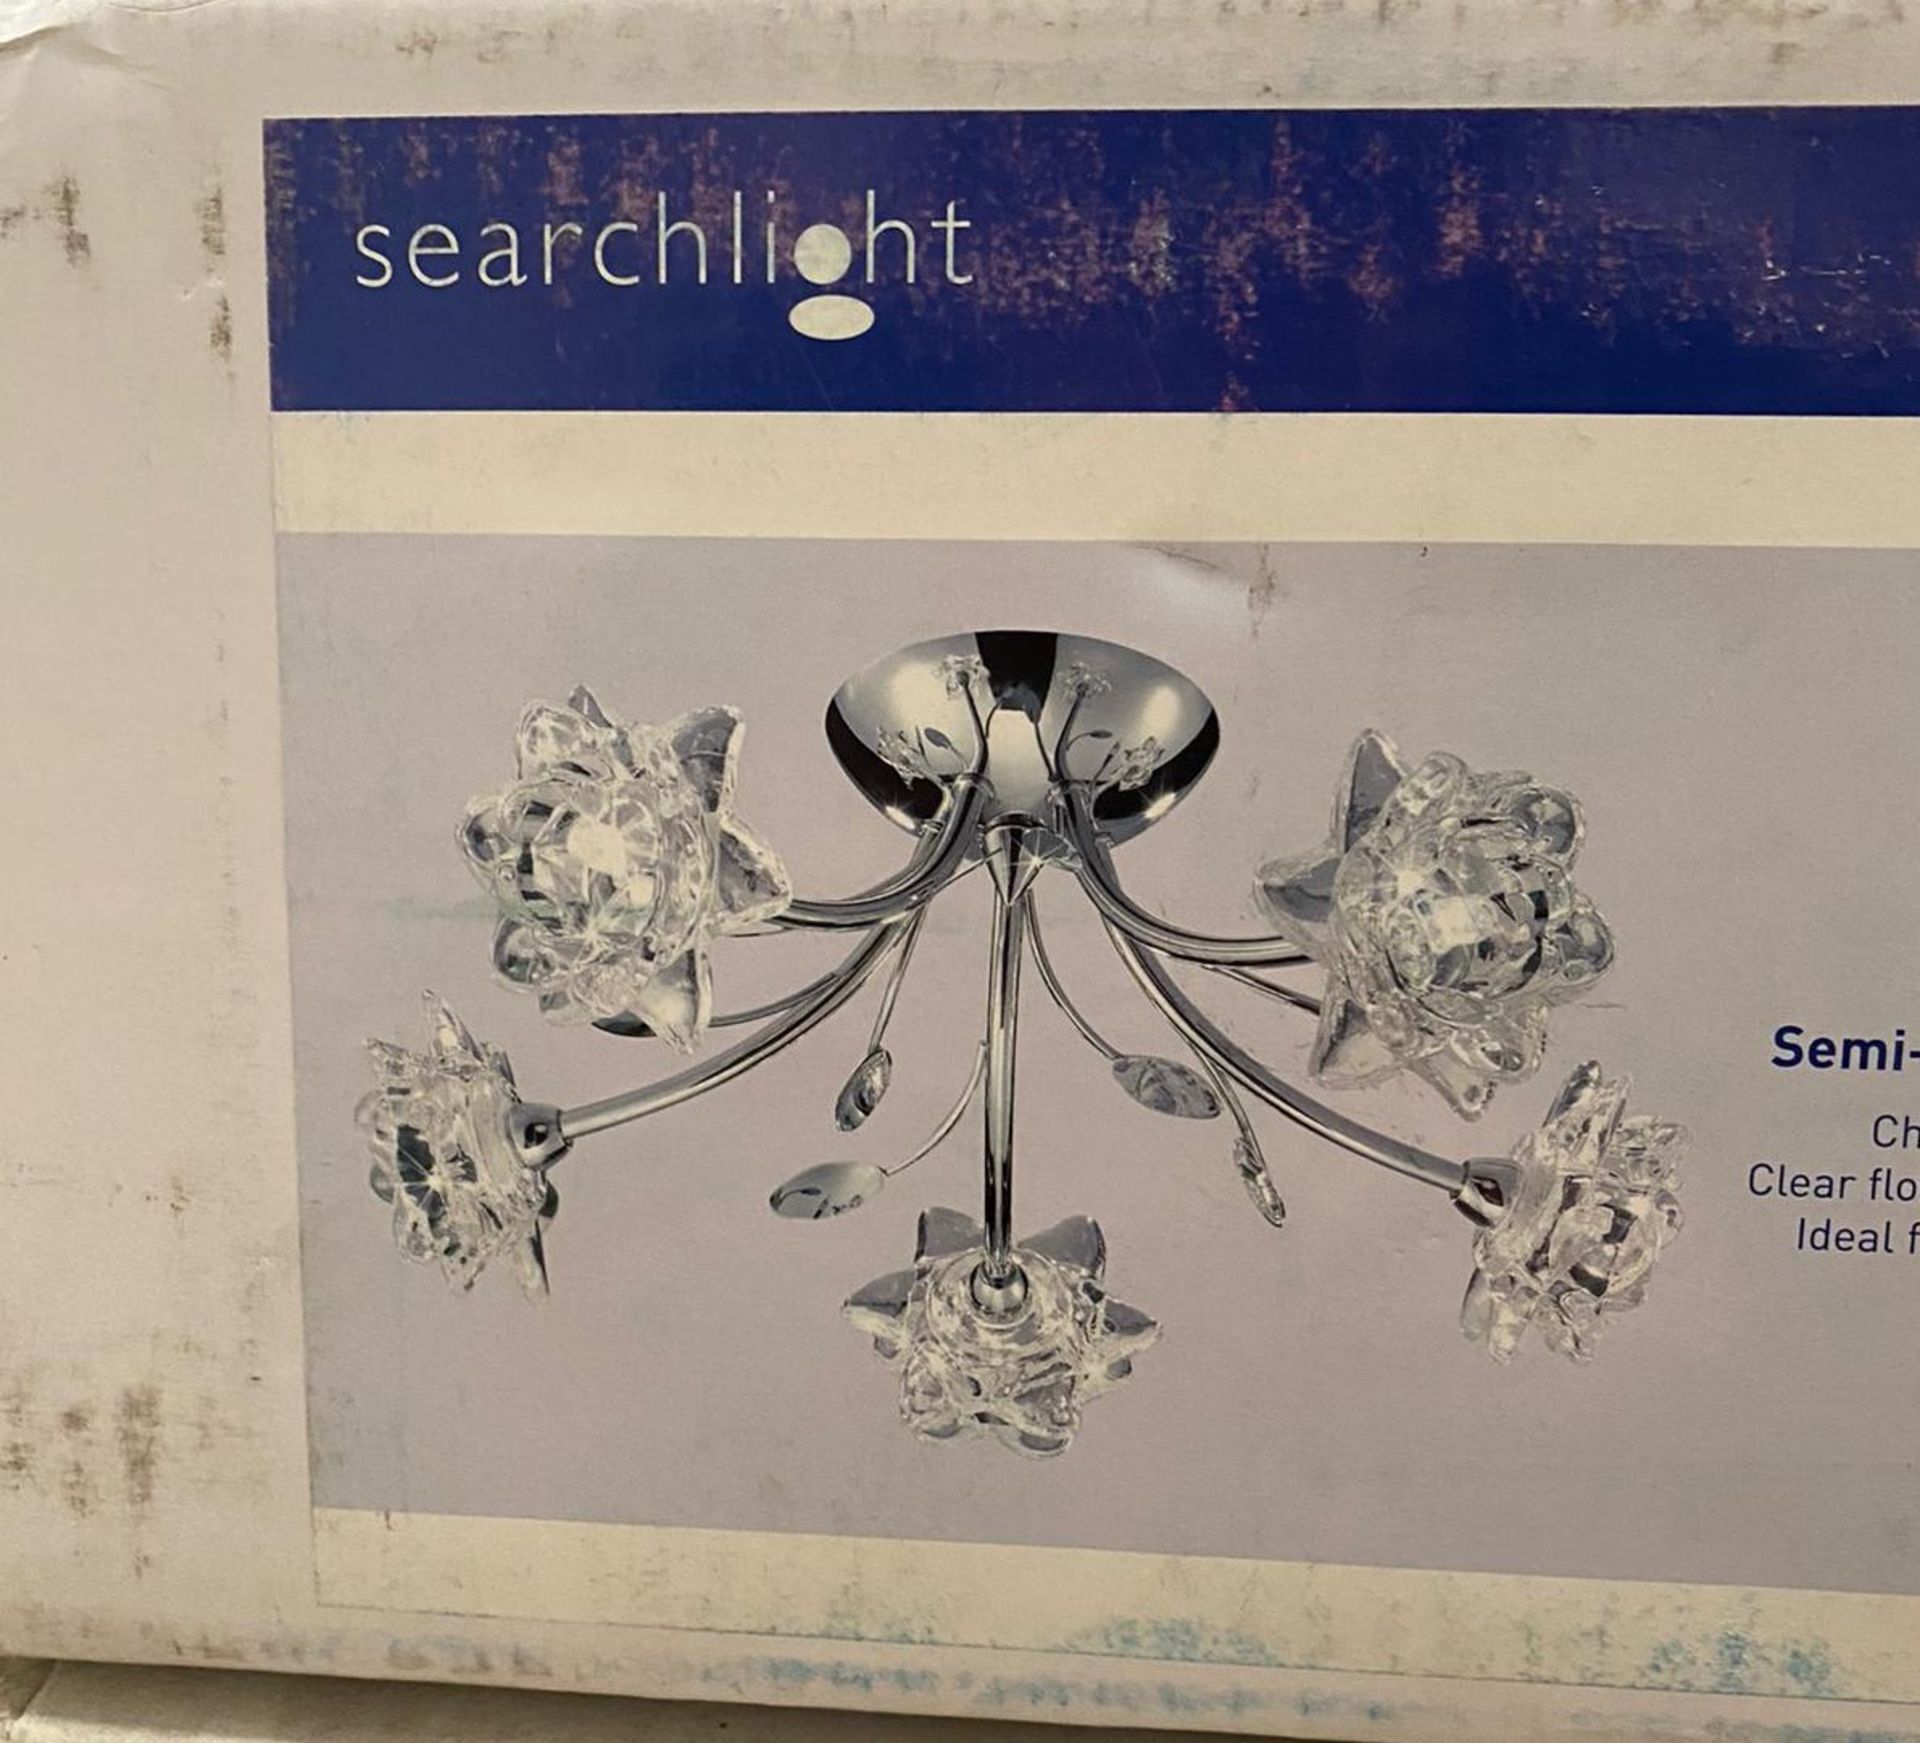 1 x Searchlight Bellis II Semi-flush fitting in chrome - Ref: 9285-5CC - New and Boxed - RRP £100 - Image 4 of 4